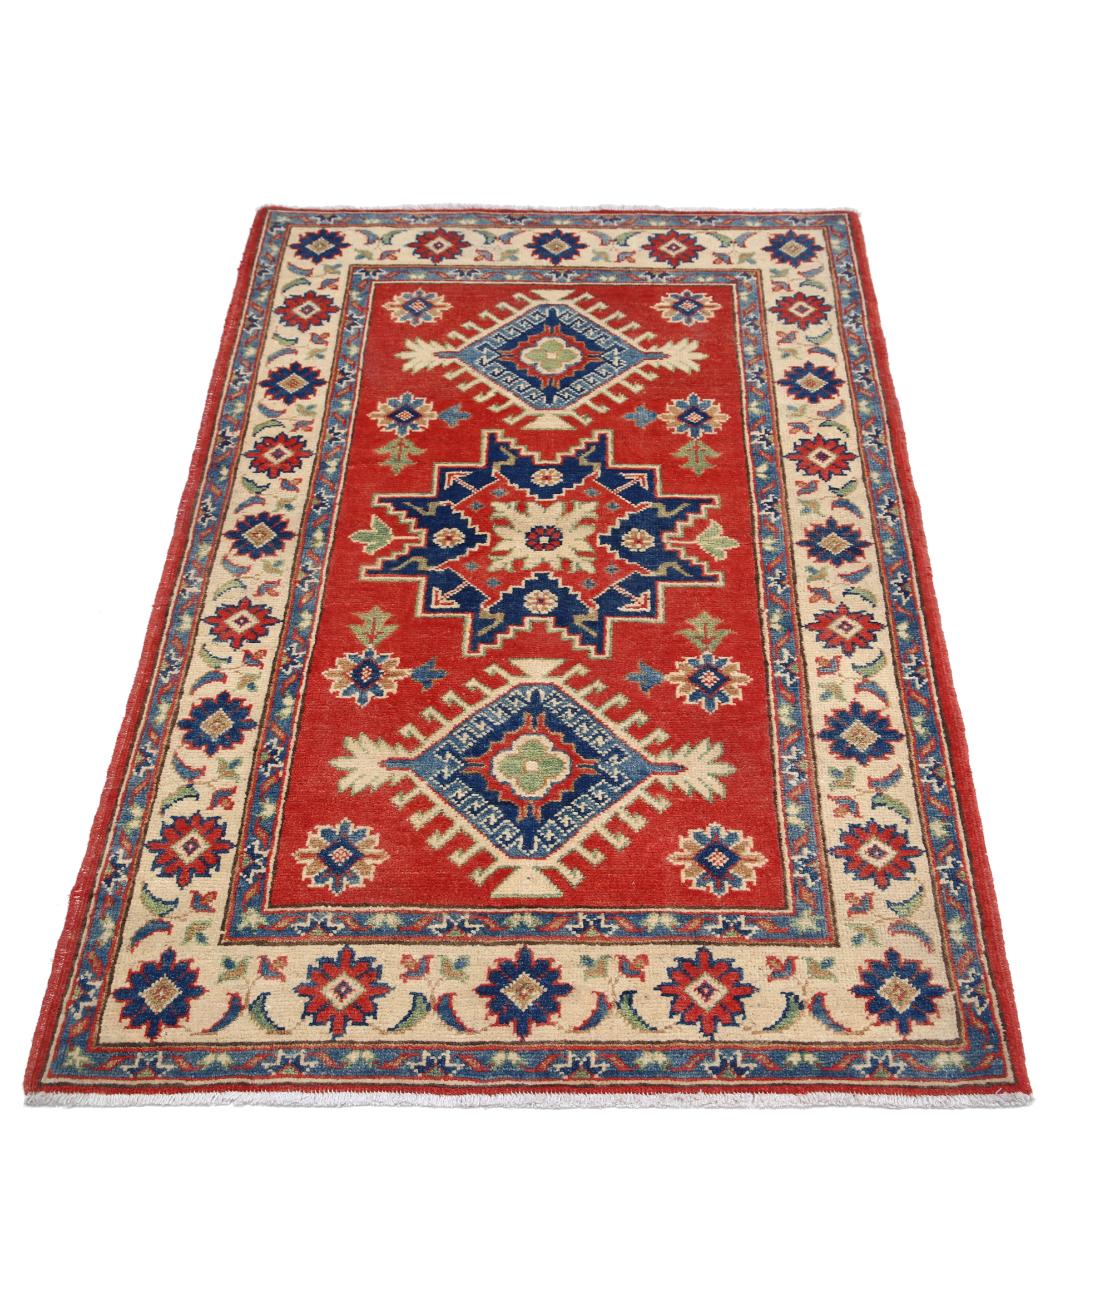 Hand Knotted Tribal Kazak Wool Rug - 3'2'' x 4'10'' 3' 2" X 4' 10" (97 X 147) / Red / Ivory